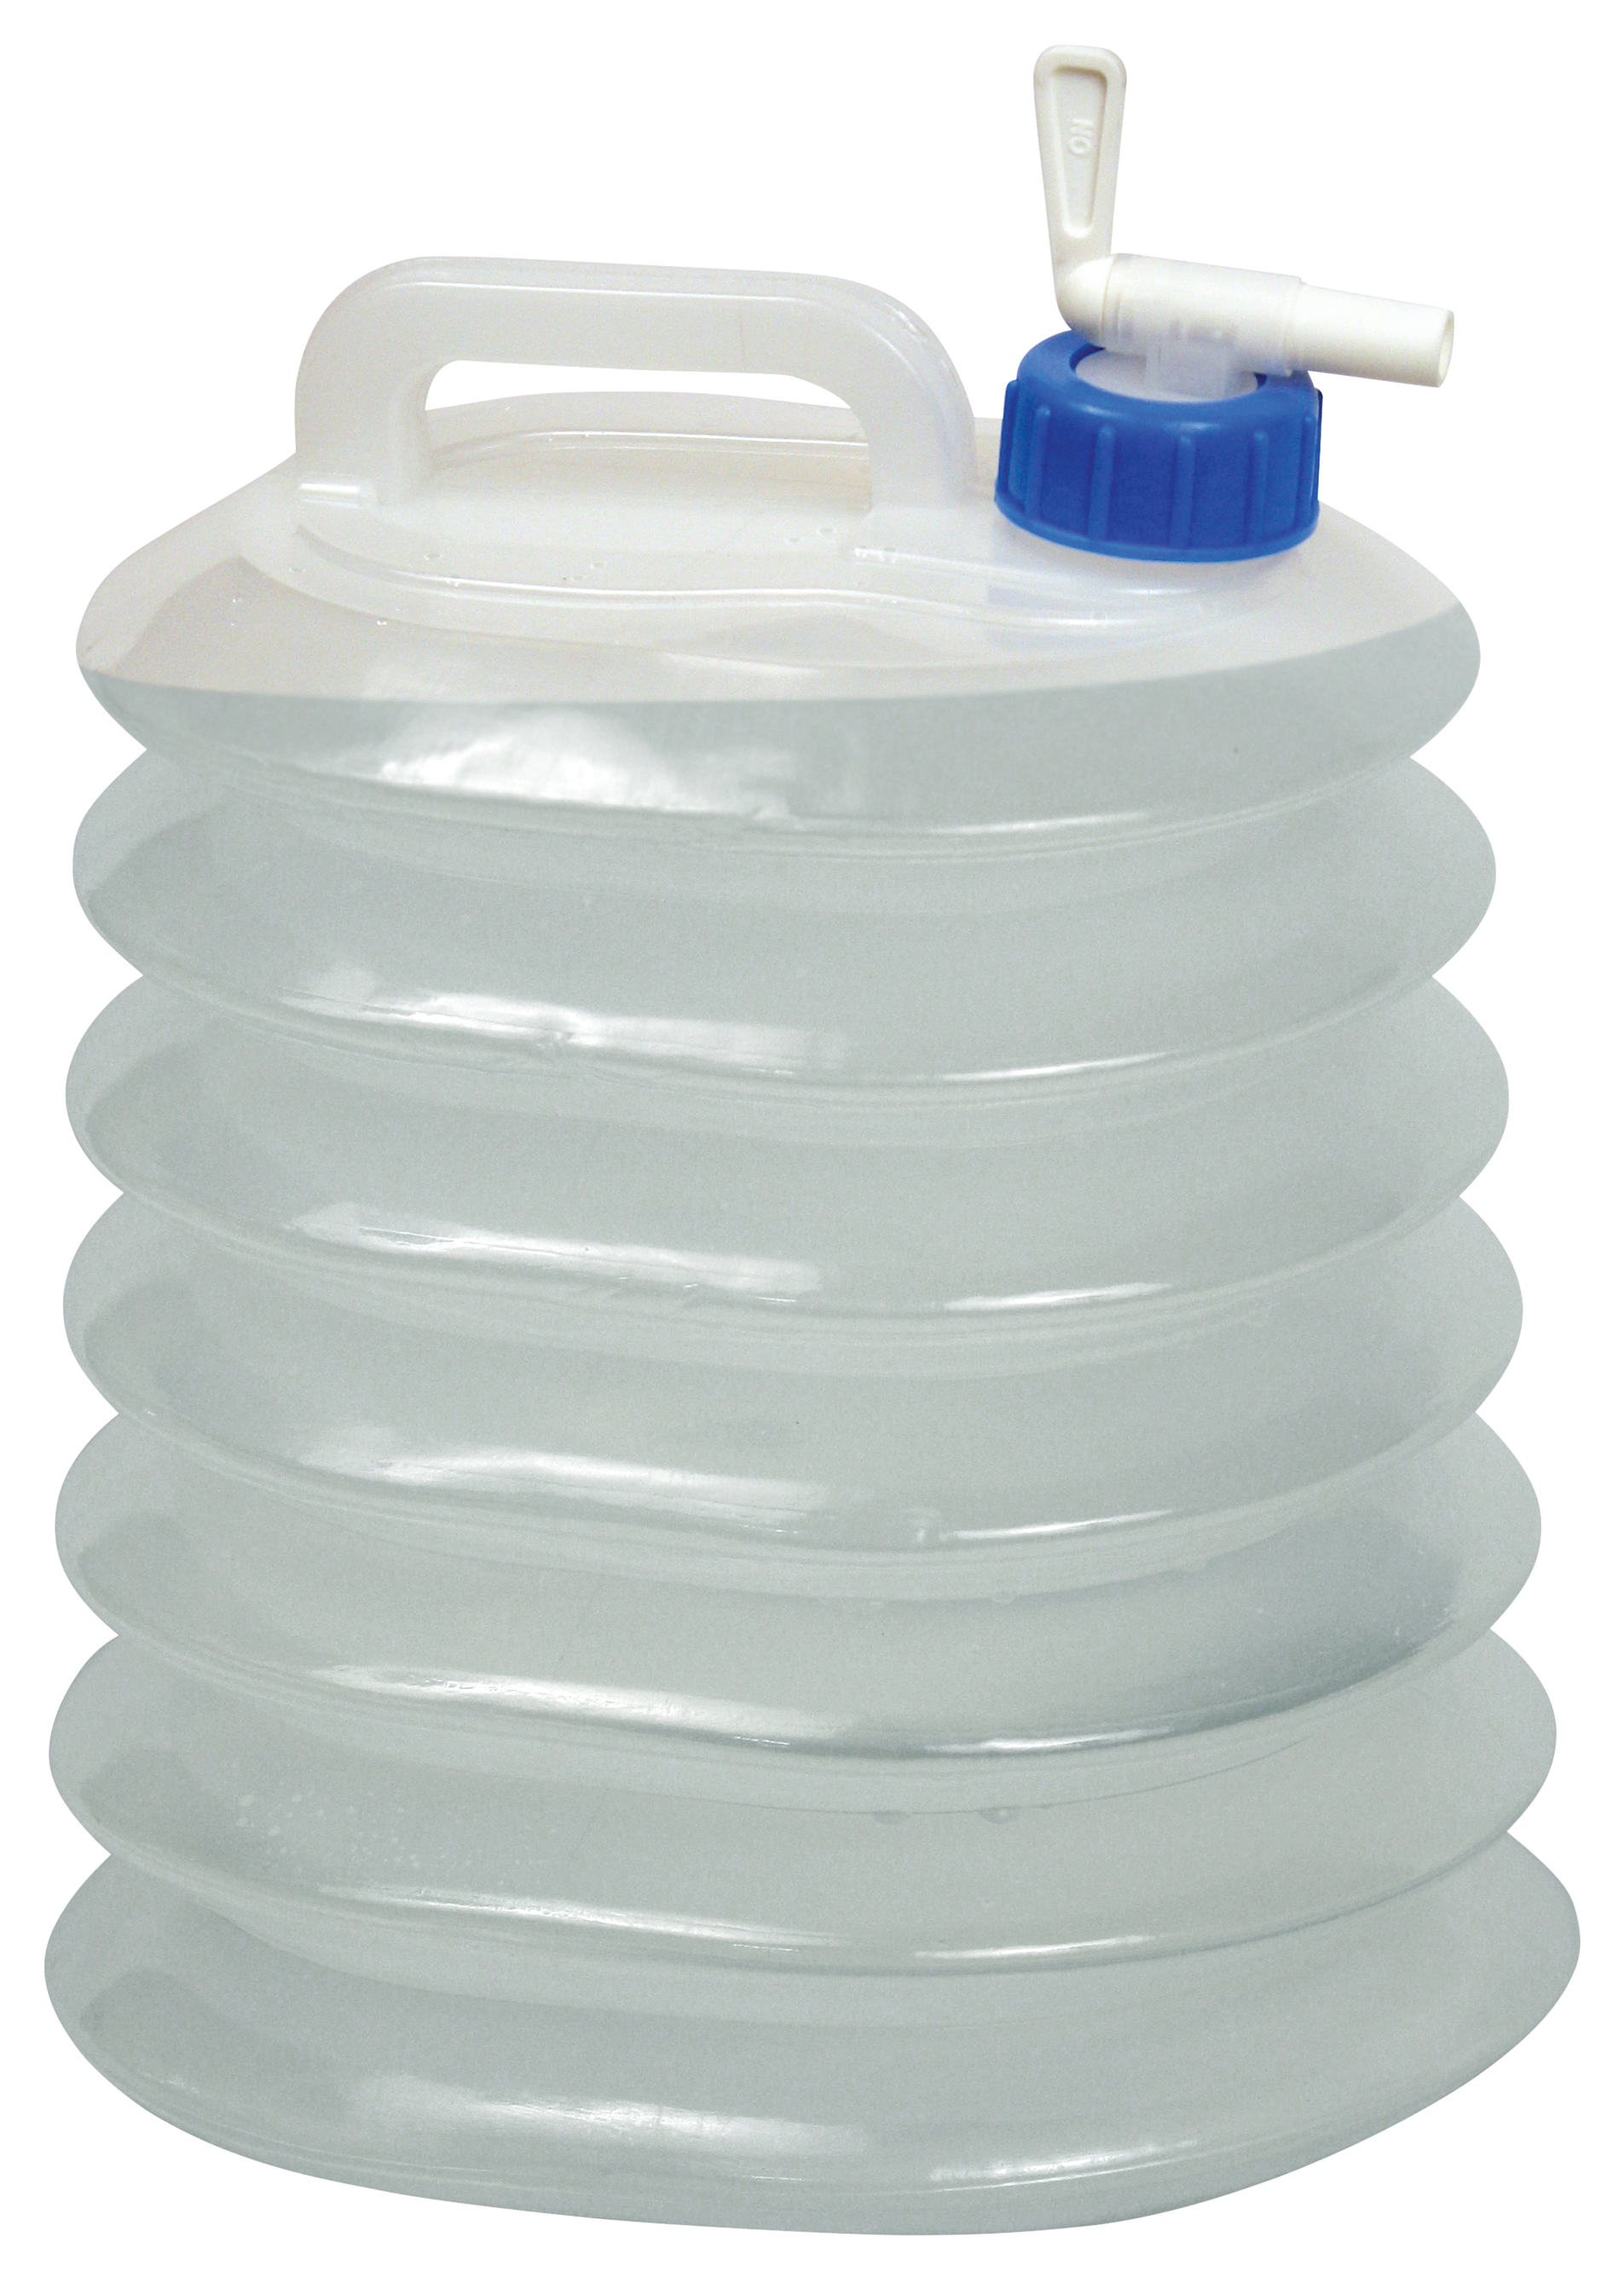 Gear Review - Reliance Beverage Buddy 15ltr Water Storage